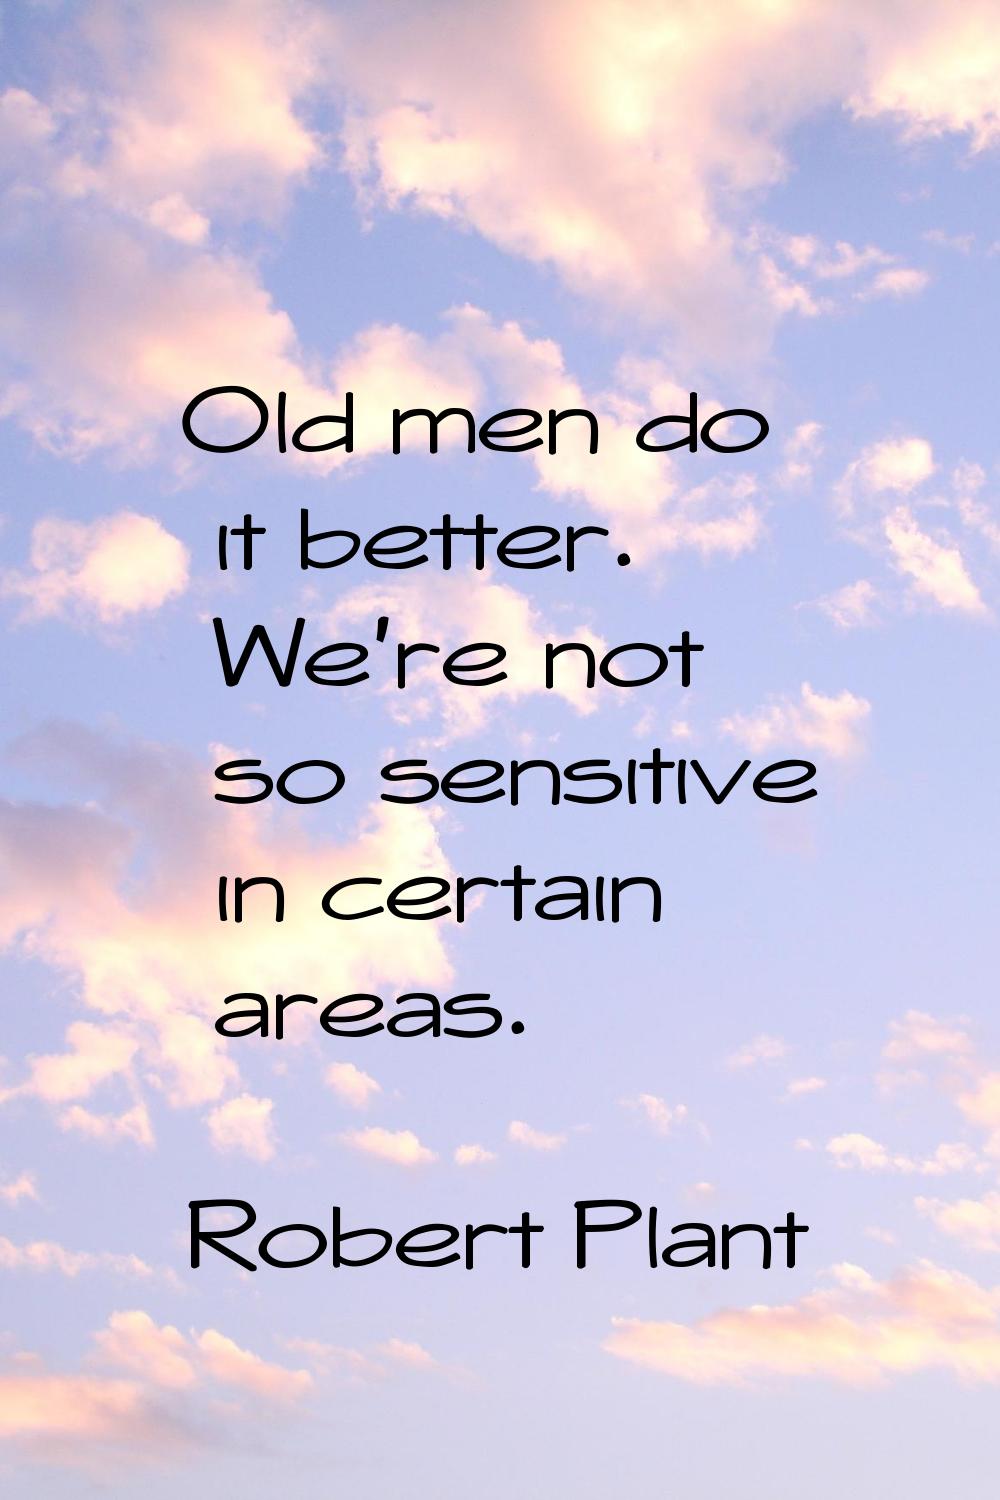 Old men do it better. We're not so sensitive in certain areas.